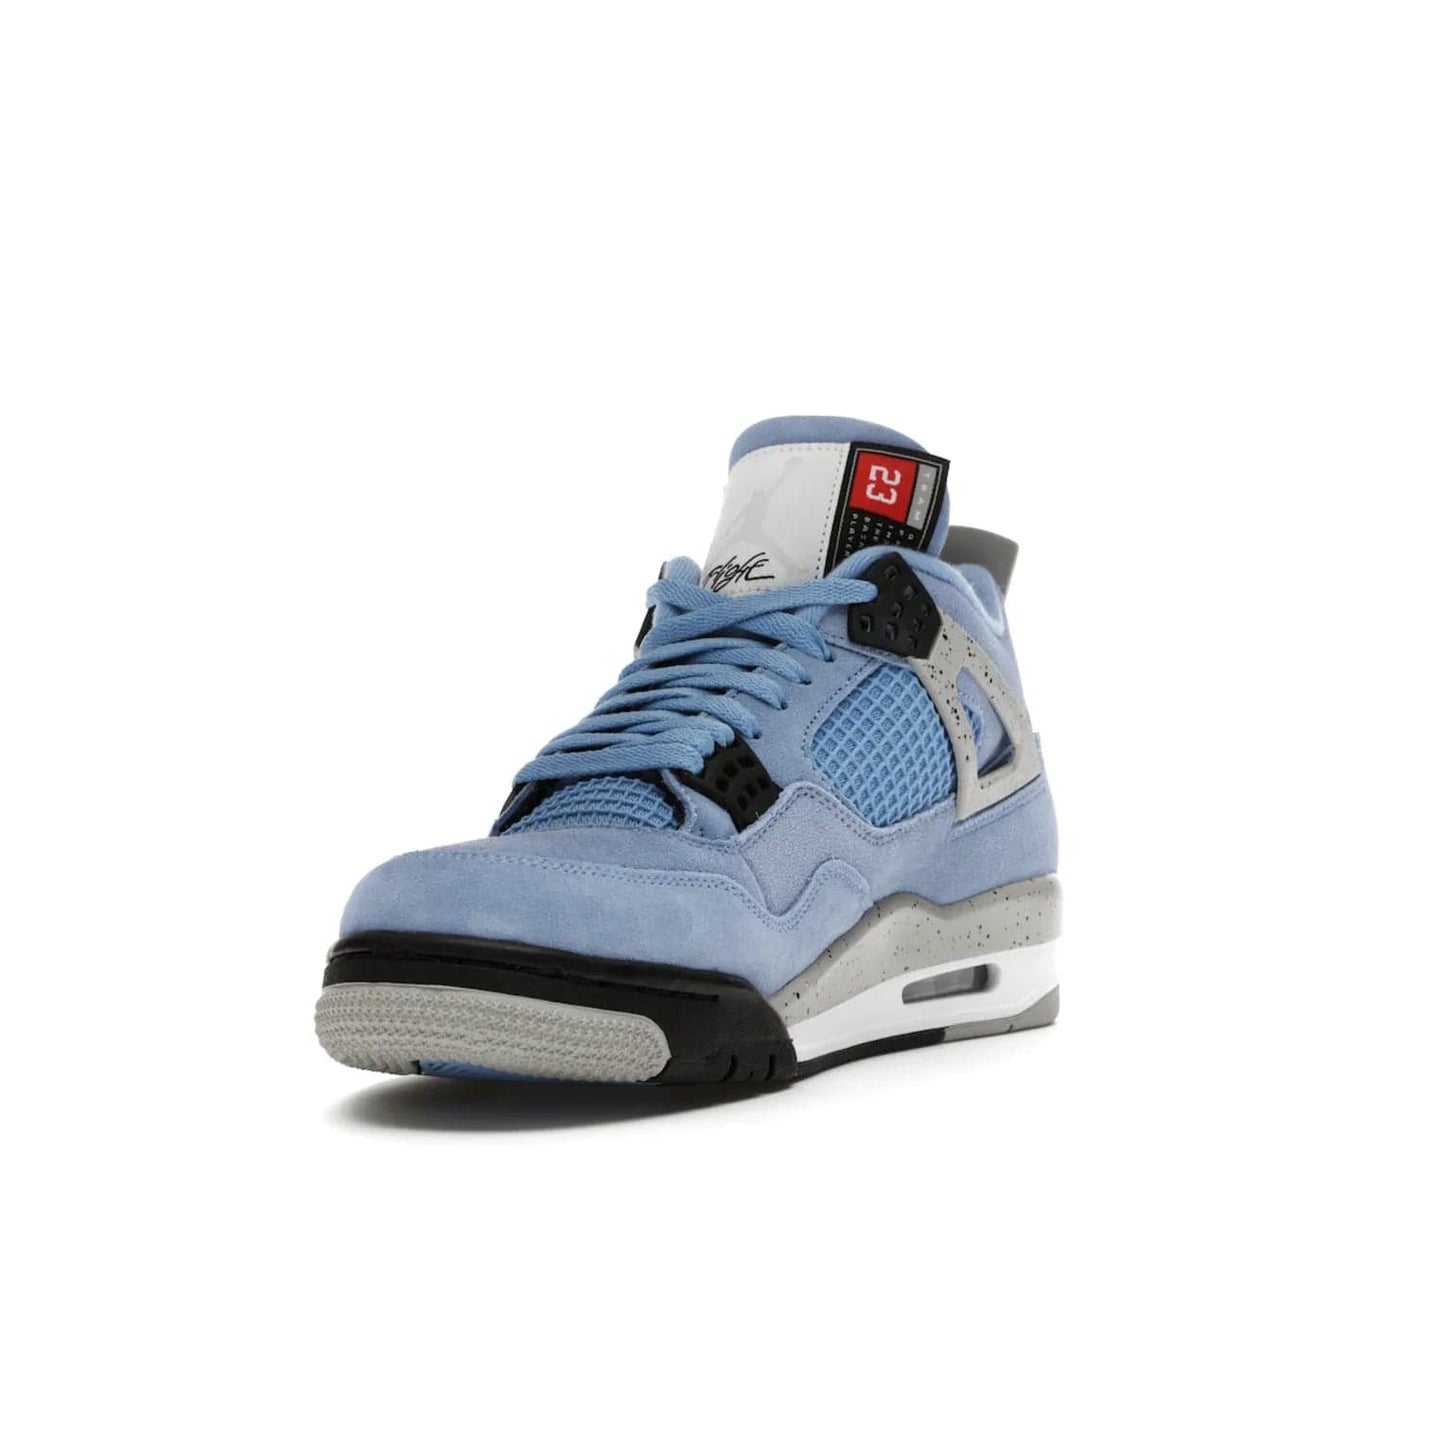 Jordan 4 Retro University Blue - Image 13 - Only at www.BallersClubKickz.com - The Air Jordan 4 University Blue honors MJ's alma mater. Rich University Blue suede, panels of netting, and Cement Grey speckled eyelets give this design an edgy look. Features a black, white and Tech Grey sole with a clear Air unit and two woven labels on the tongue. Jumpman logo & Team Jordan jock tag included. Released April 2021.